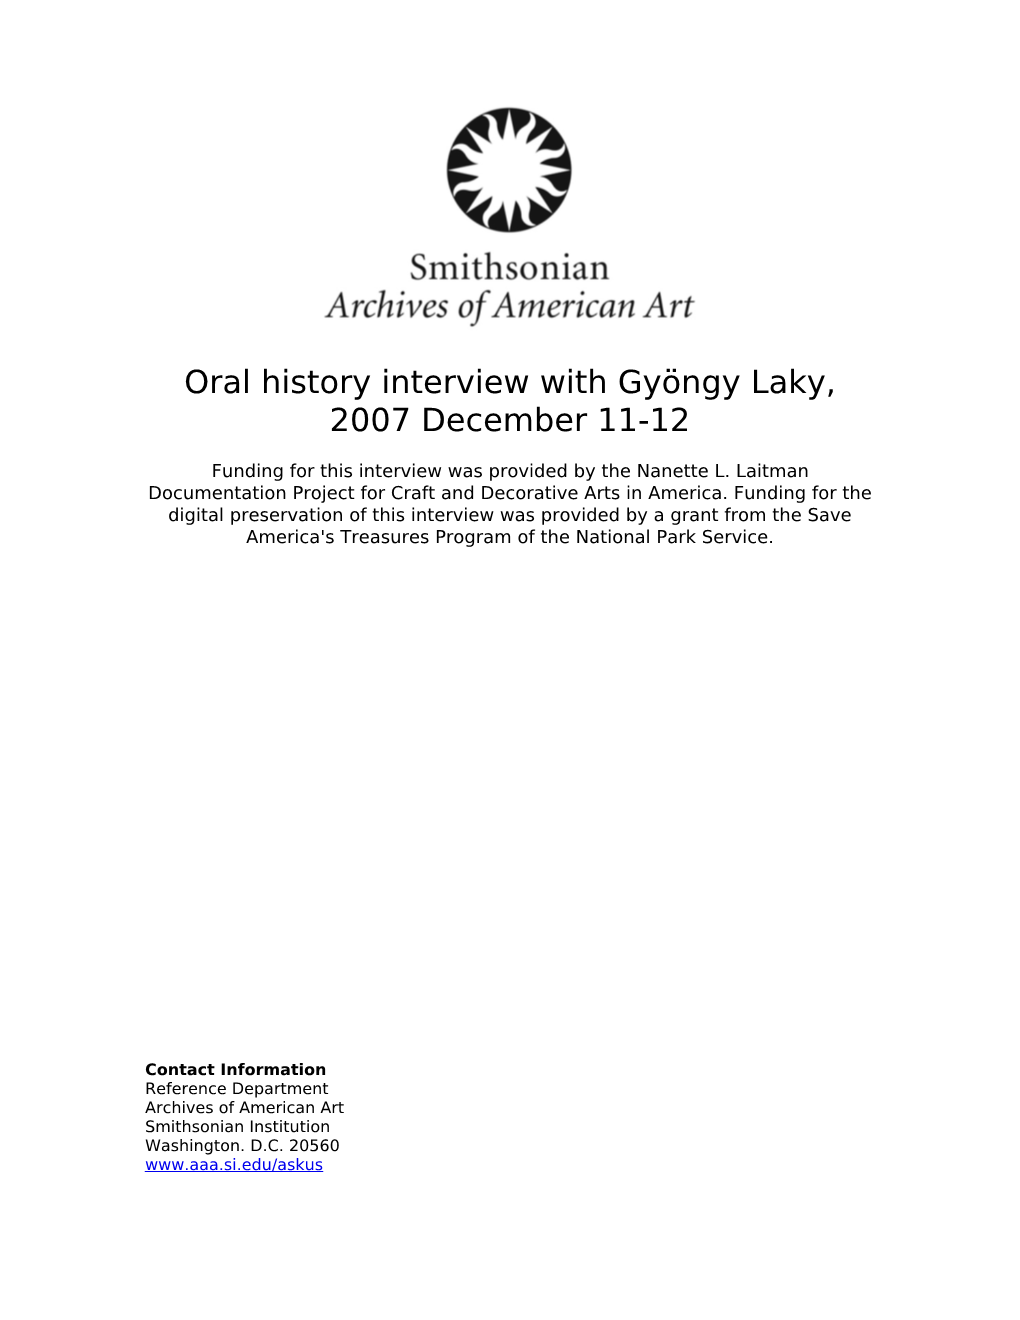 Oral History Interview with Gyöngy Laky, 2007 December 11-12